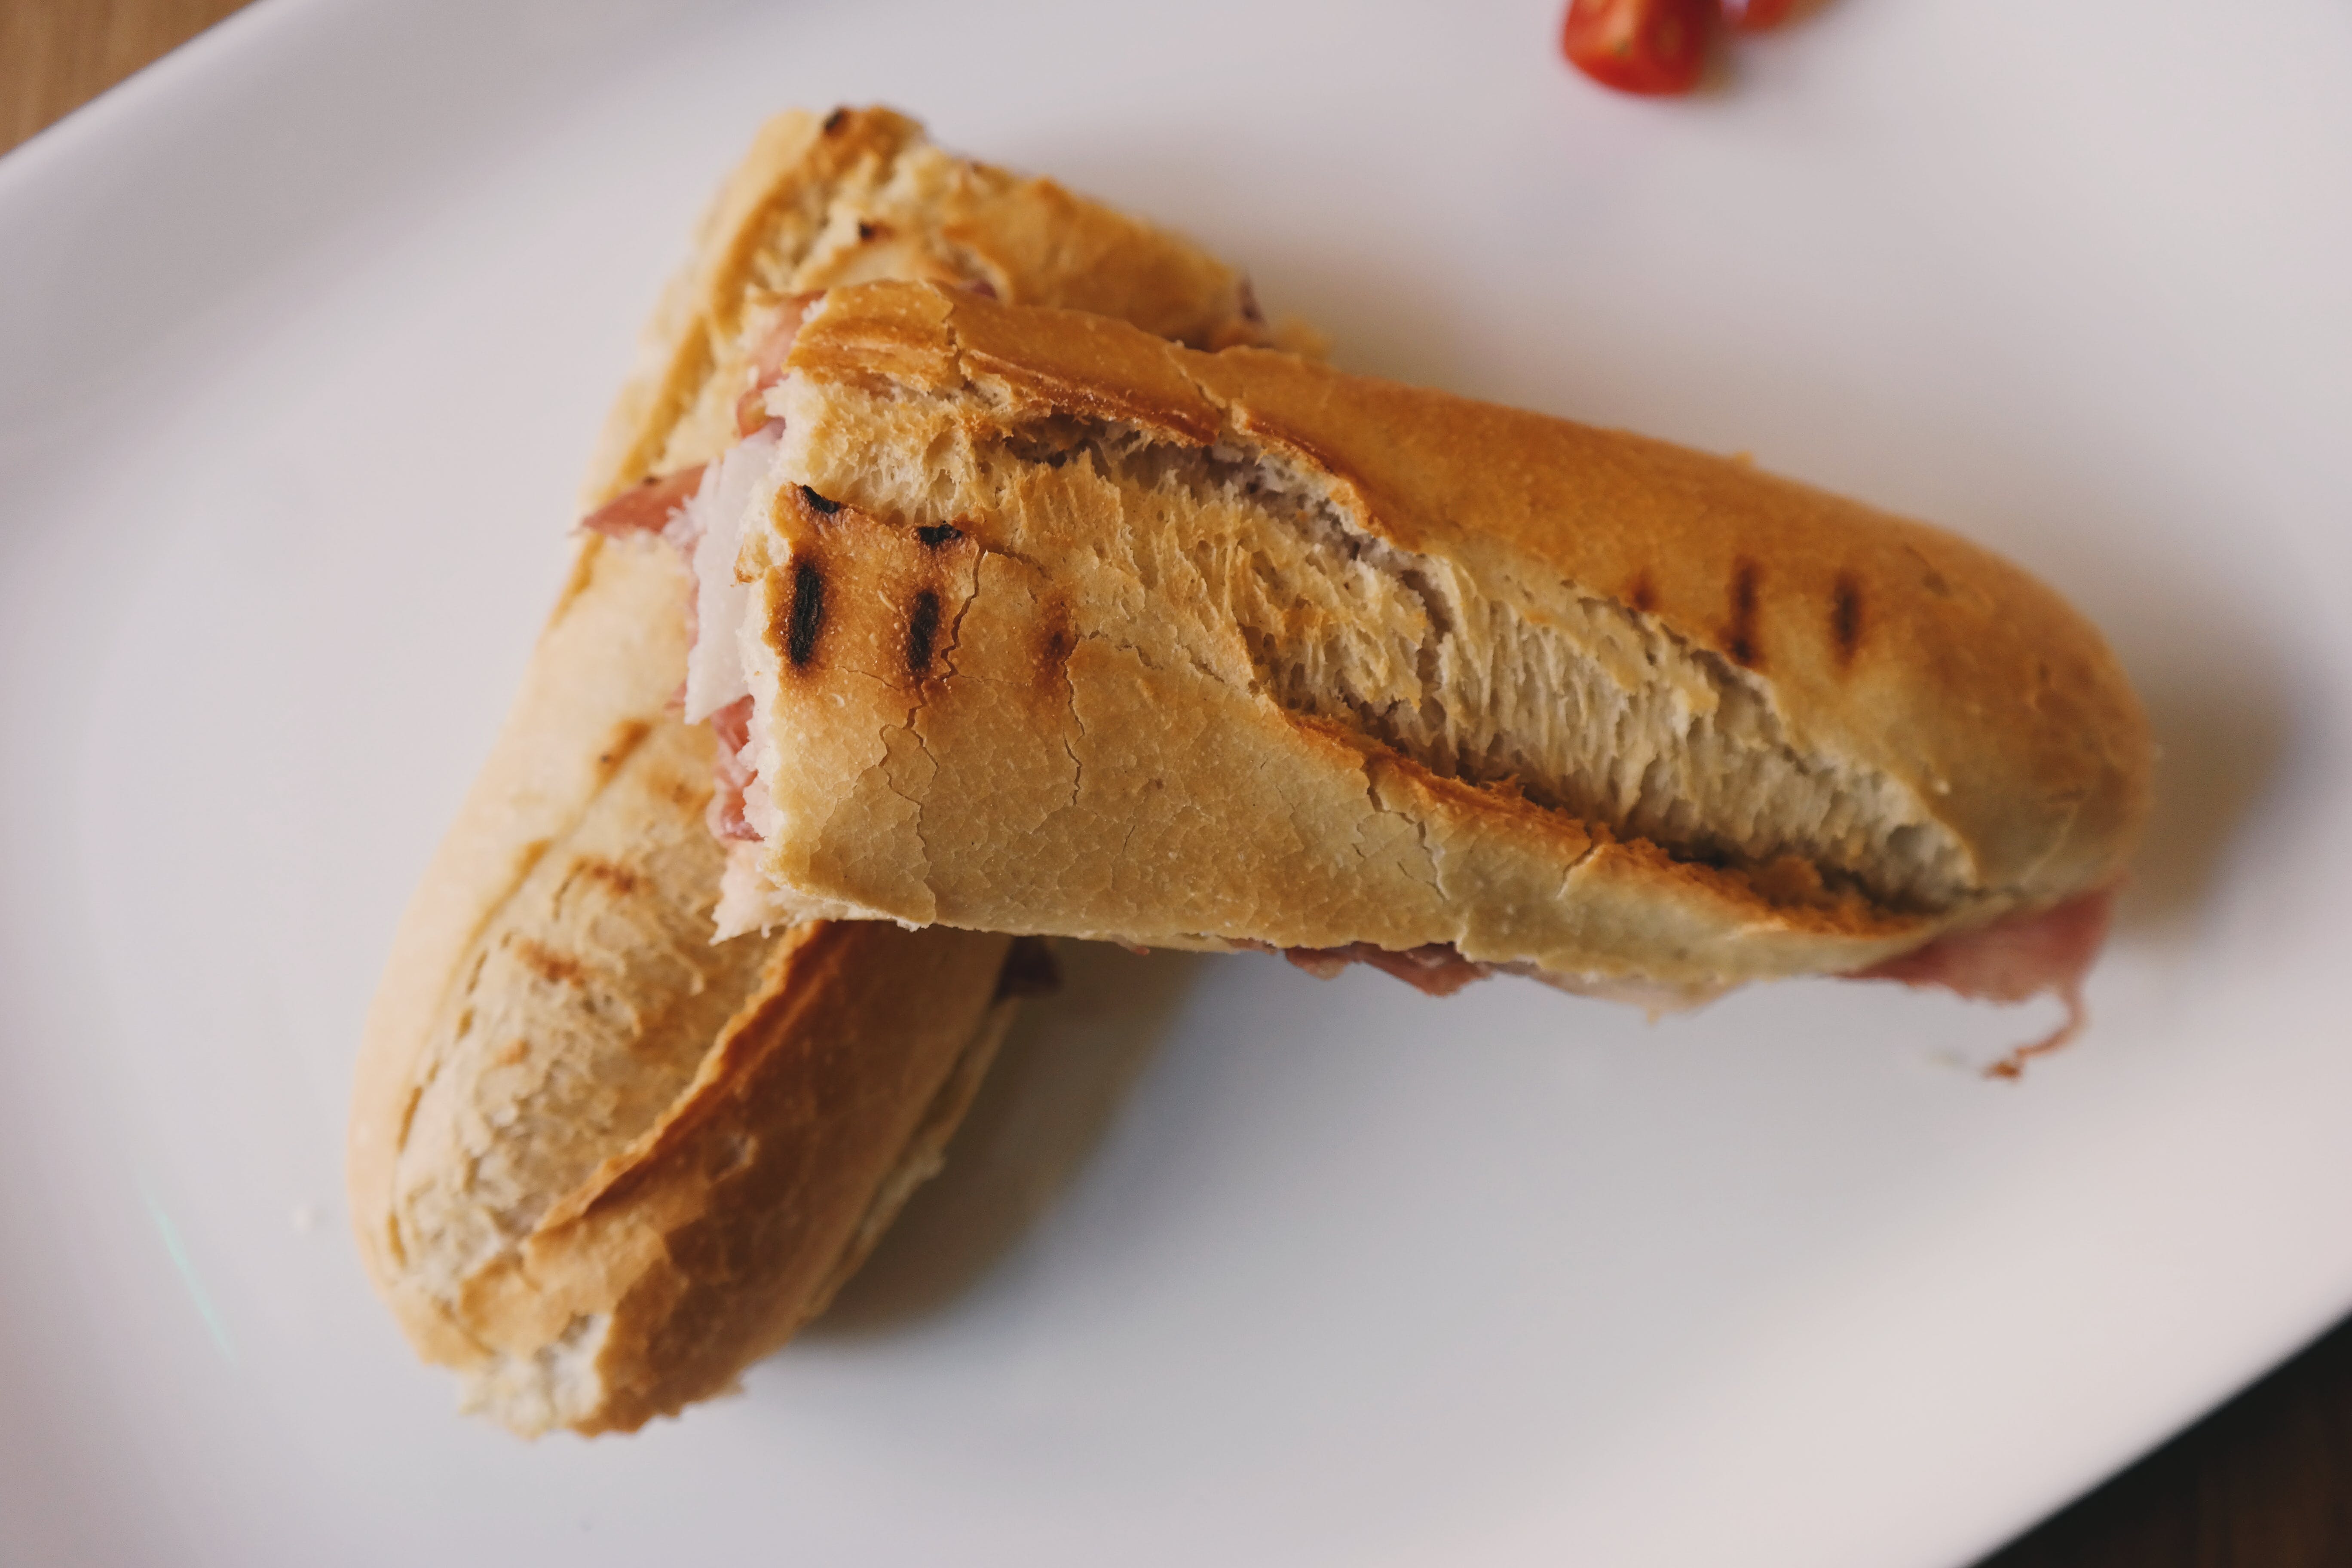 French bread | Source: Pexels